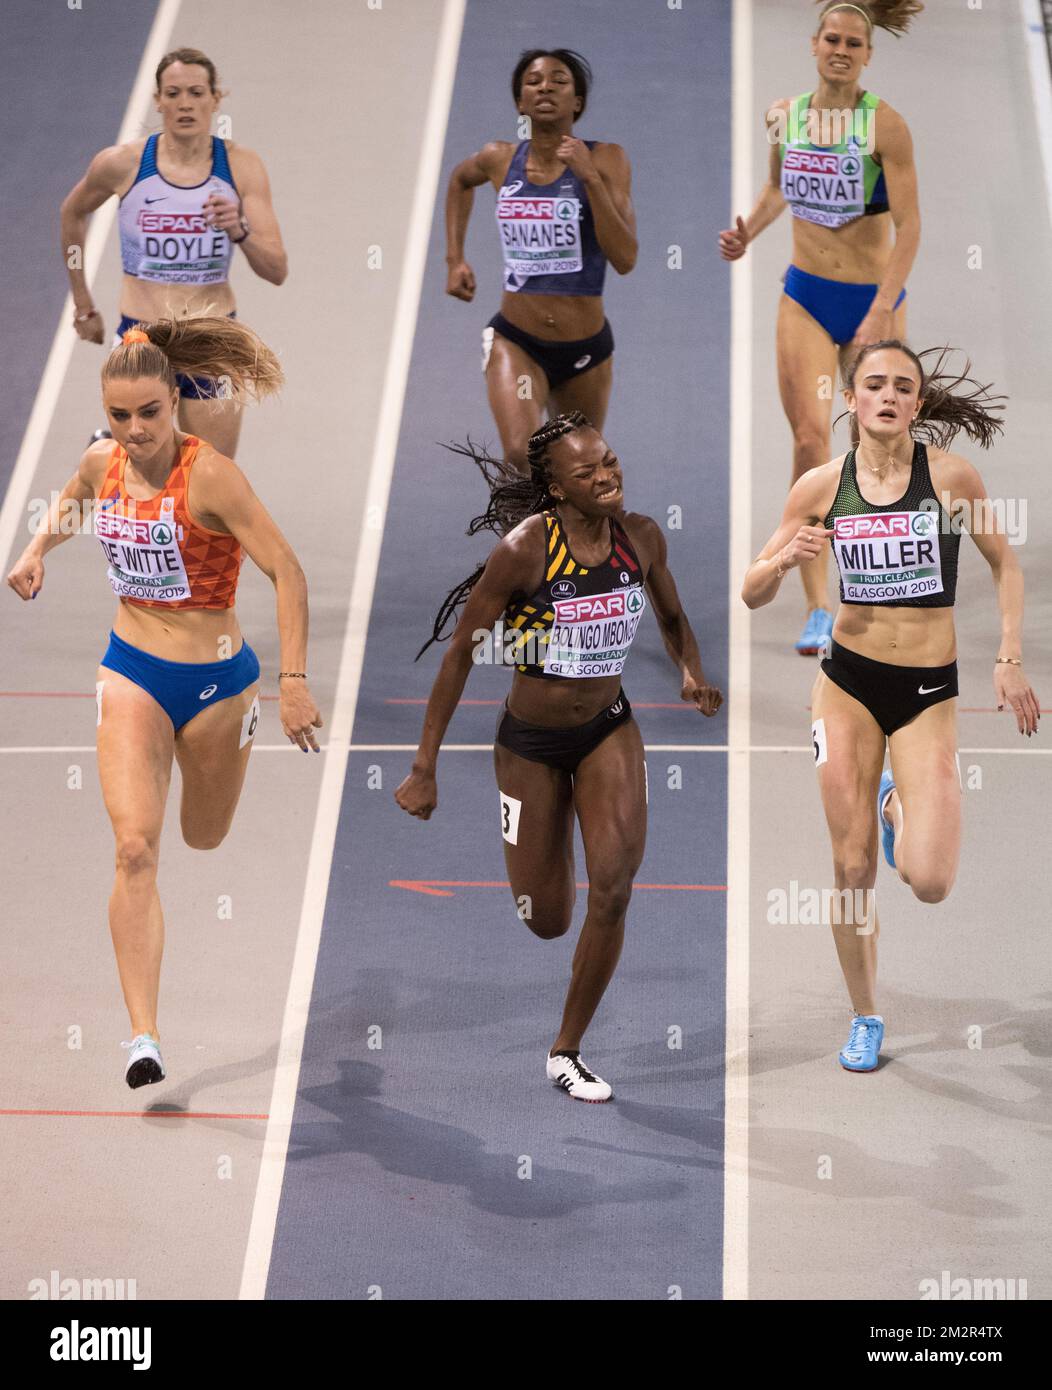 Dutch Lisanne De Witte, Belgian Cynthia Bolingo Mbongo and Russian Polina Miller sprint for the finish of the semi finals of the women's 400m competition on the first day of the European Athletics Indoor Championships, in Glasgow, Scotland, Friday 01 March 2019. The championships take place from 1 to 3 March. BELGA PHOTO BENOIT DOPPAGNE Stock Photo